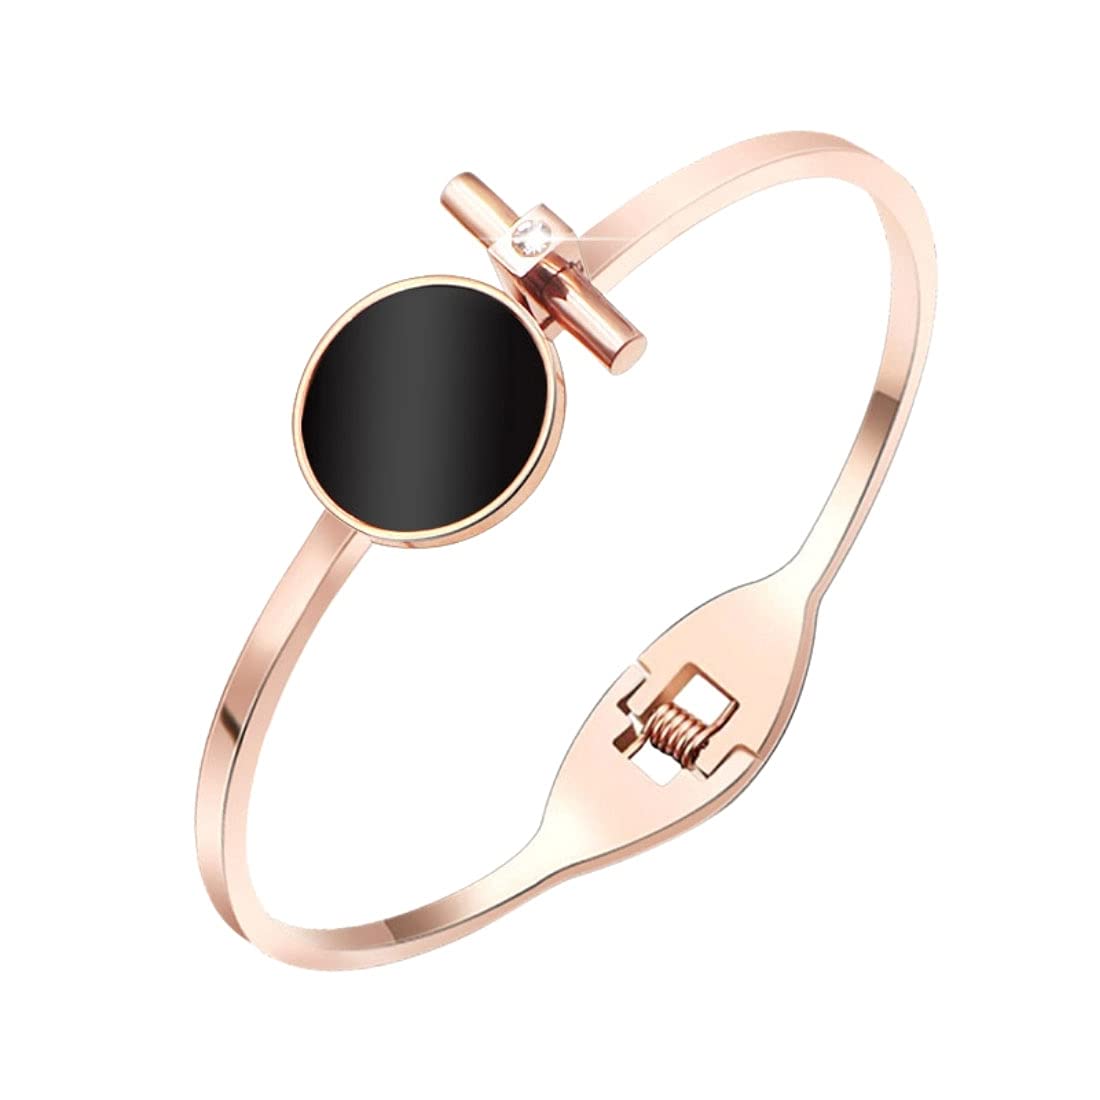 Yellow Chimes Kada Bracelet for Women Stainless Steel RoseGold Plated Black Circle Statement Style Kadaa Bracelet for Women and Girls.